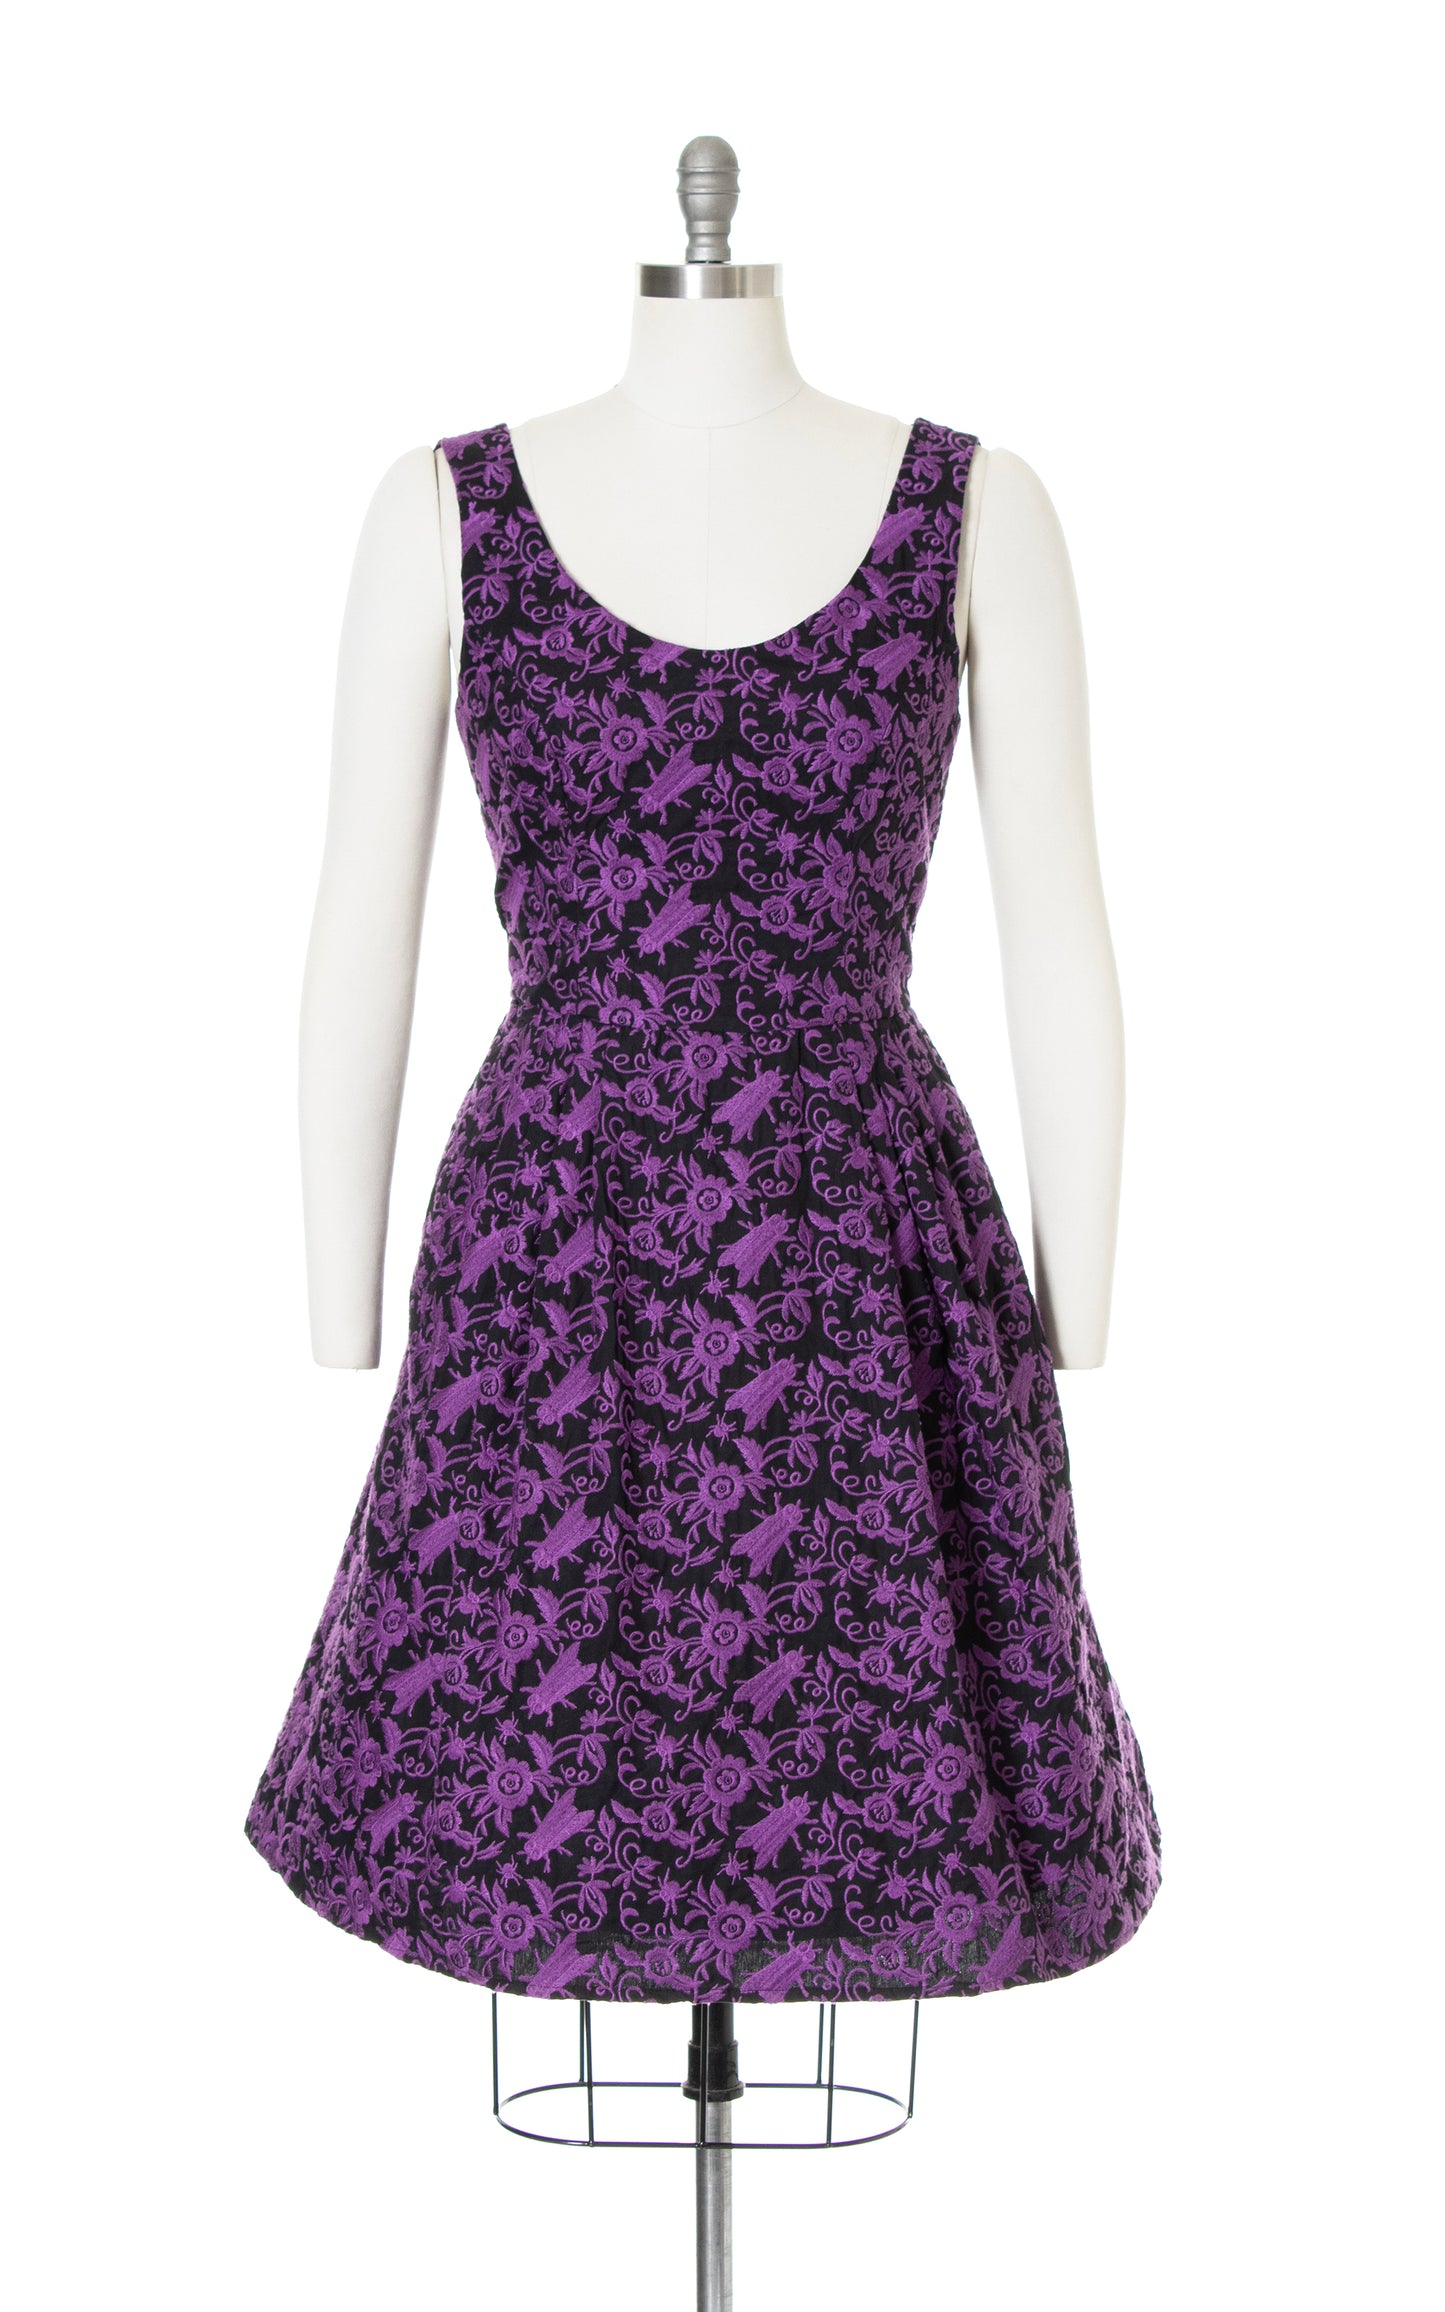 MODERN BETSEY JOHNSON Bug Floral Embroidered Cotton Dress | small/medium